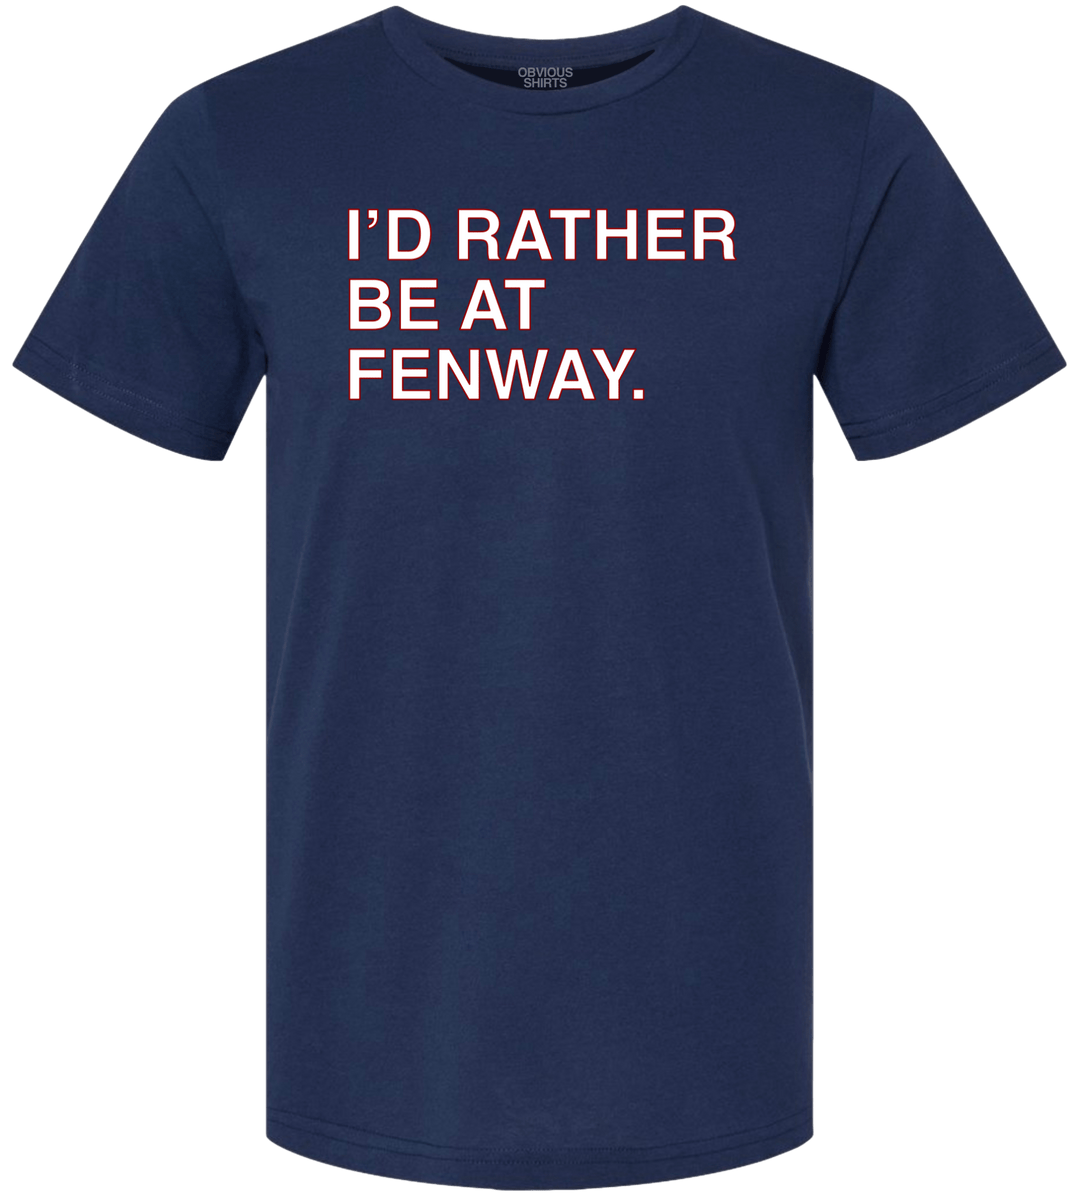 I'D RATHER BE AT FENWAY. - OBVIOUS SHIRTS